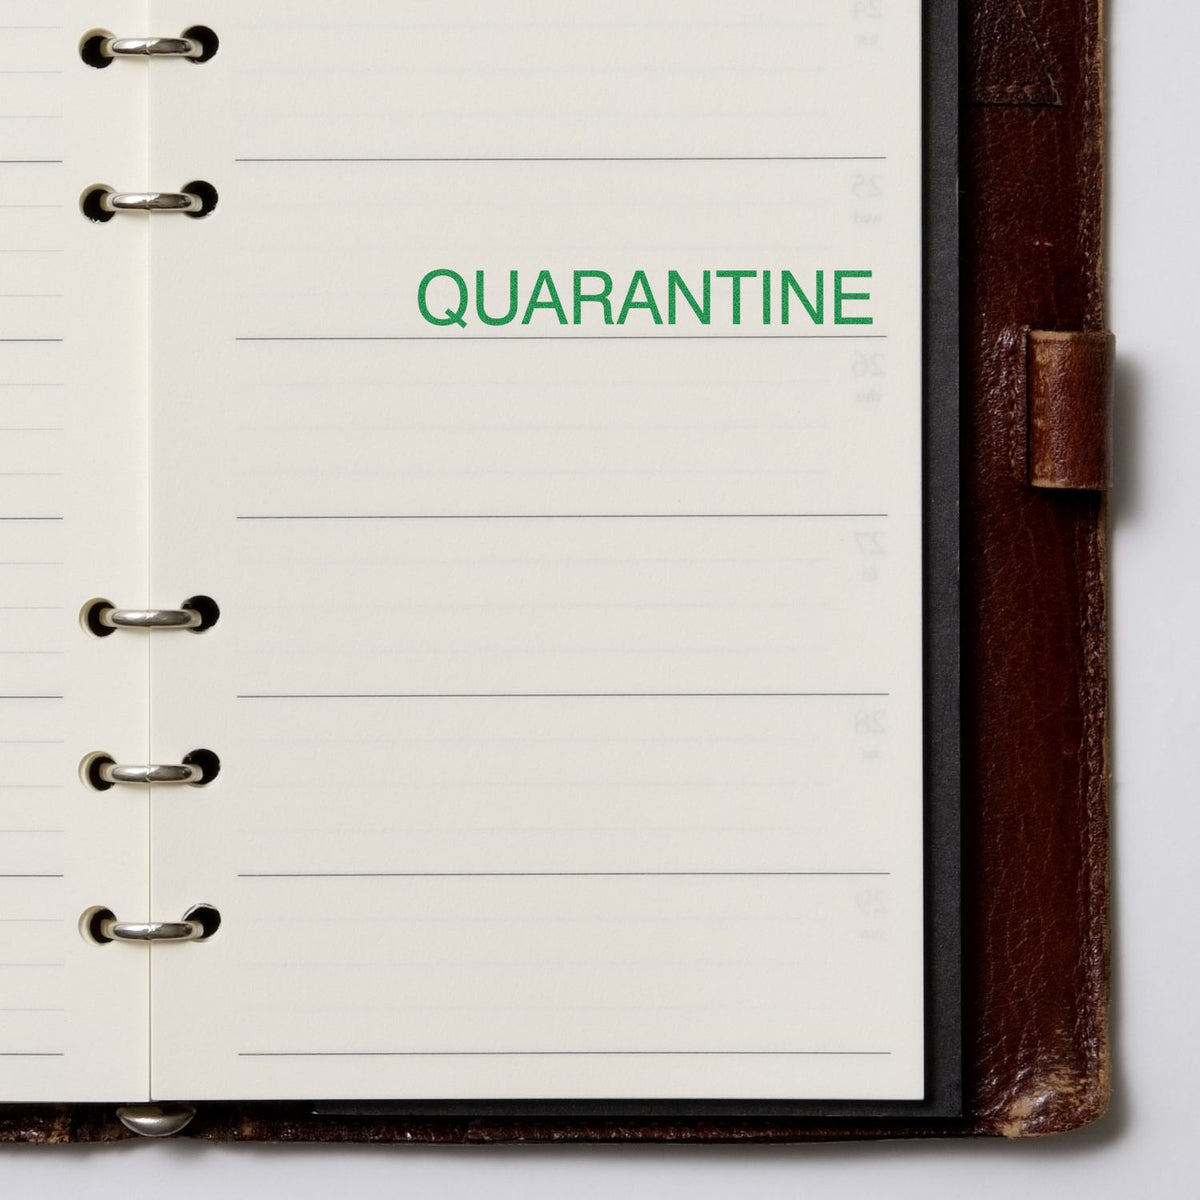 Large Quarantine Rubber Stamp In Use